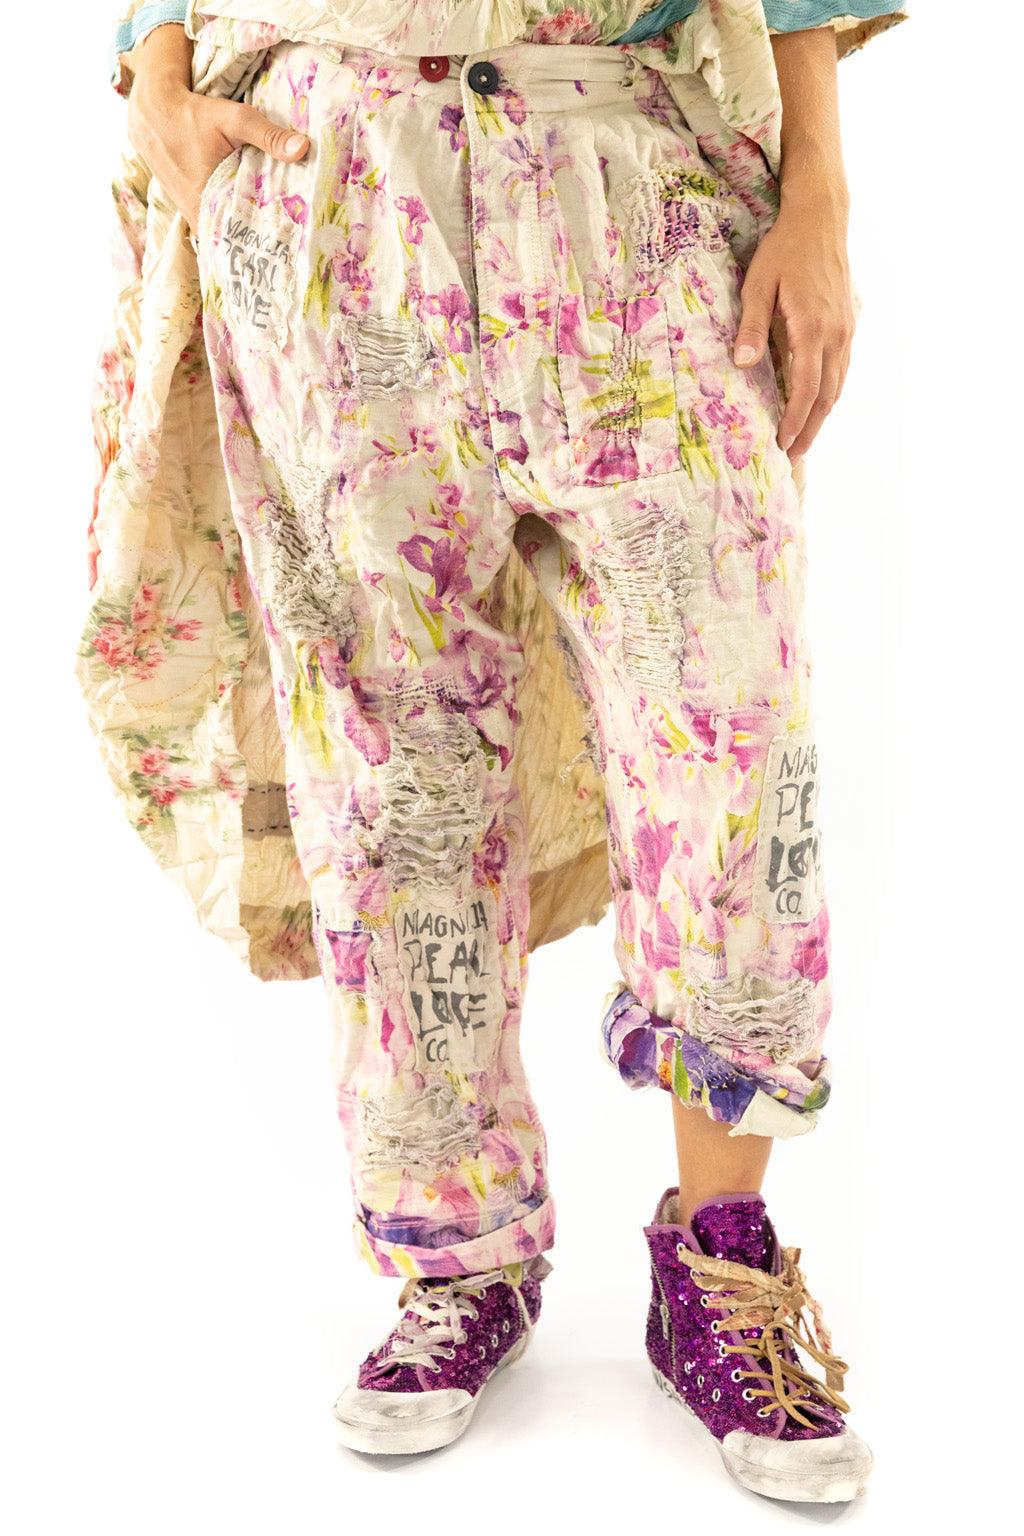 Floral Charmie Trousers - Magnolia Pearl Clothing